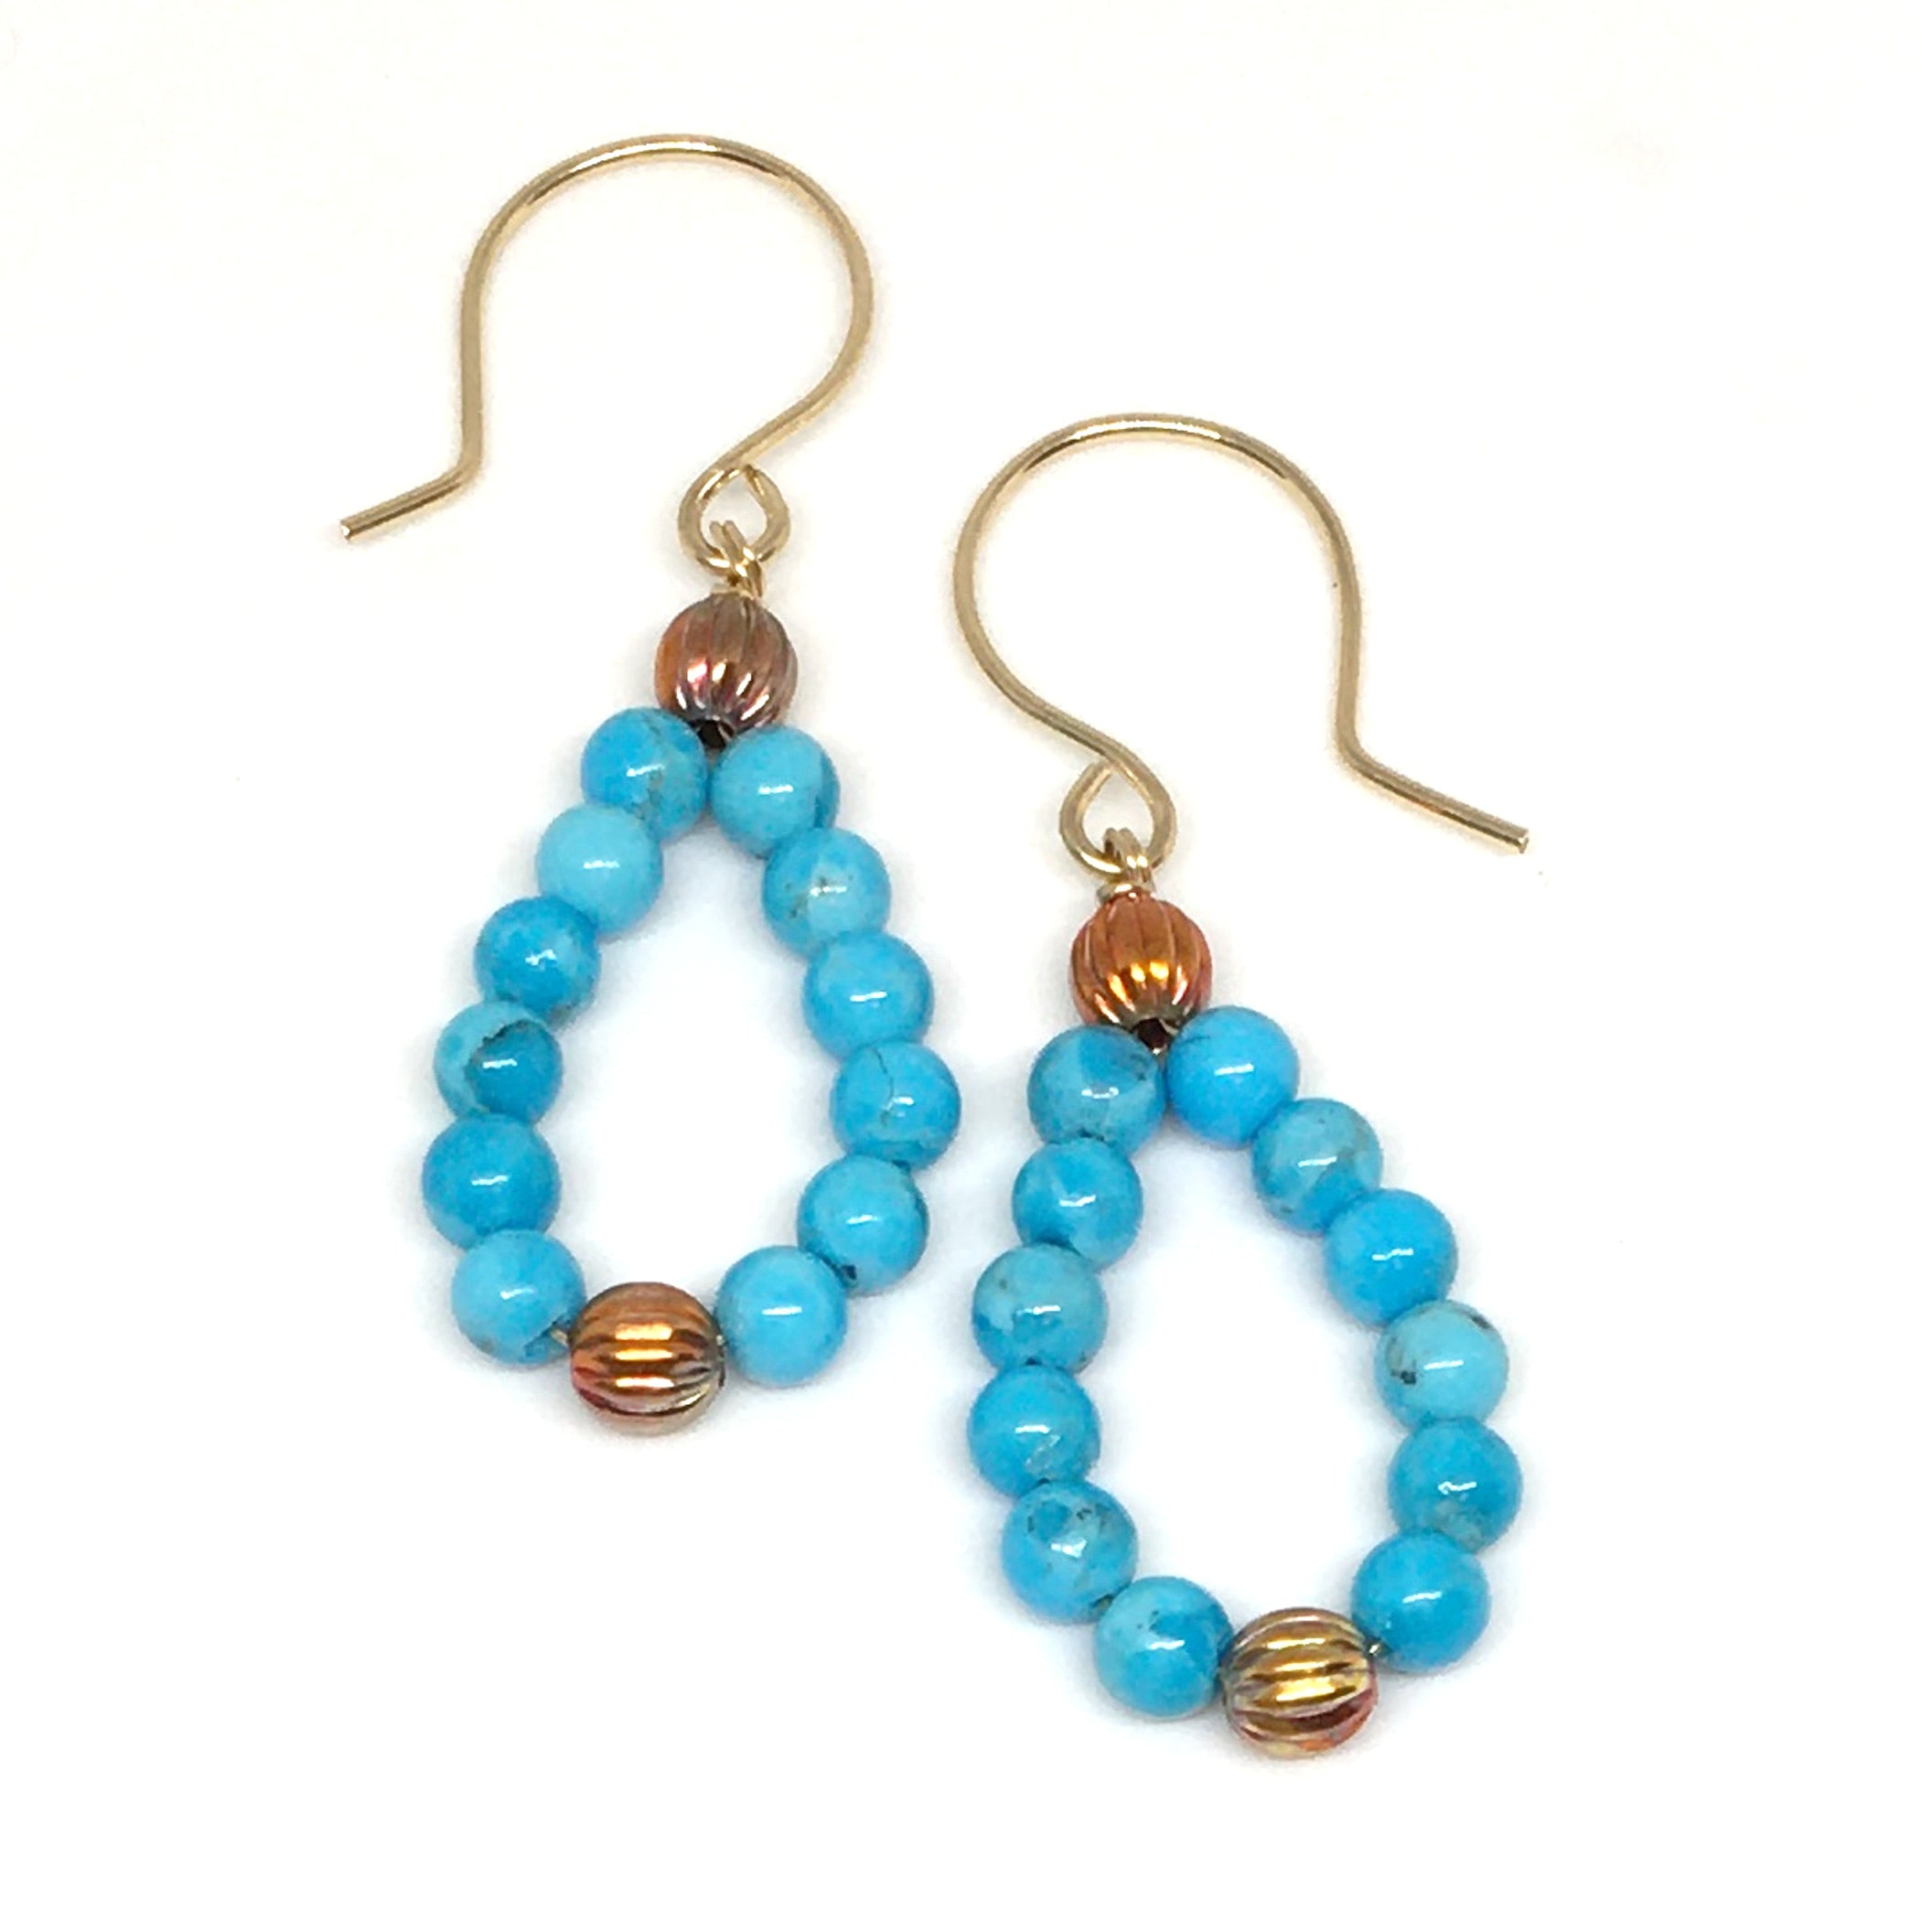 Kingman Turquoise and Flame Painted Copper Bead Hoop Earrings - Sonoran Sunset Collection